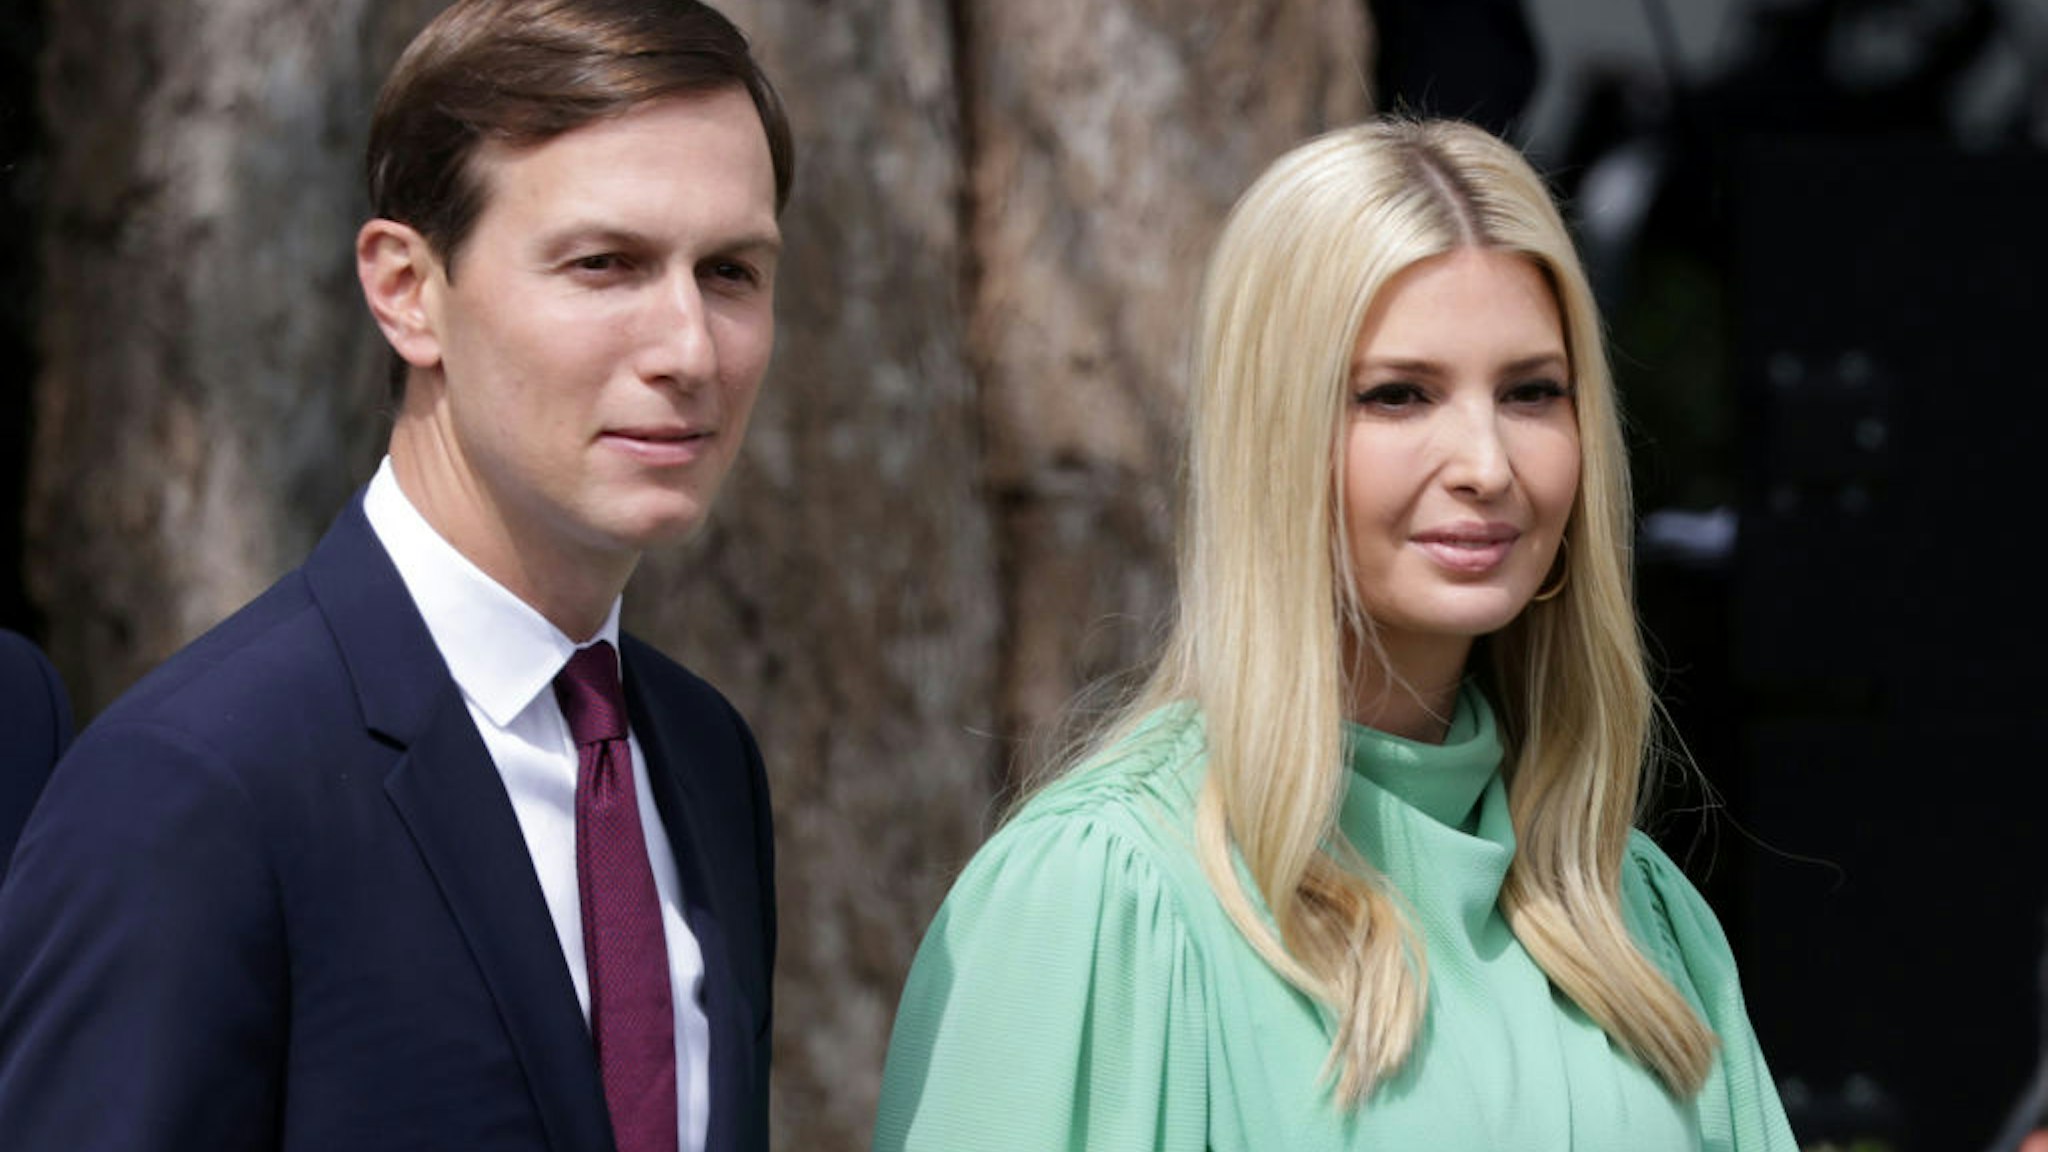 Special adviser to the president Jared Kushner (L) and Ivanka Trump arrive to the signing ceremony of the Abraham Accords on the South Lawn of the White House September 15, 2020 in Washington, DC.